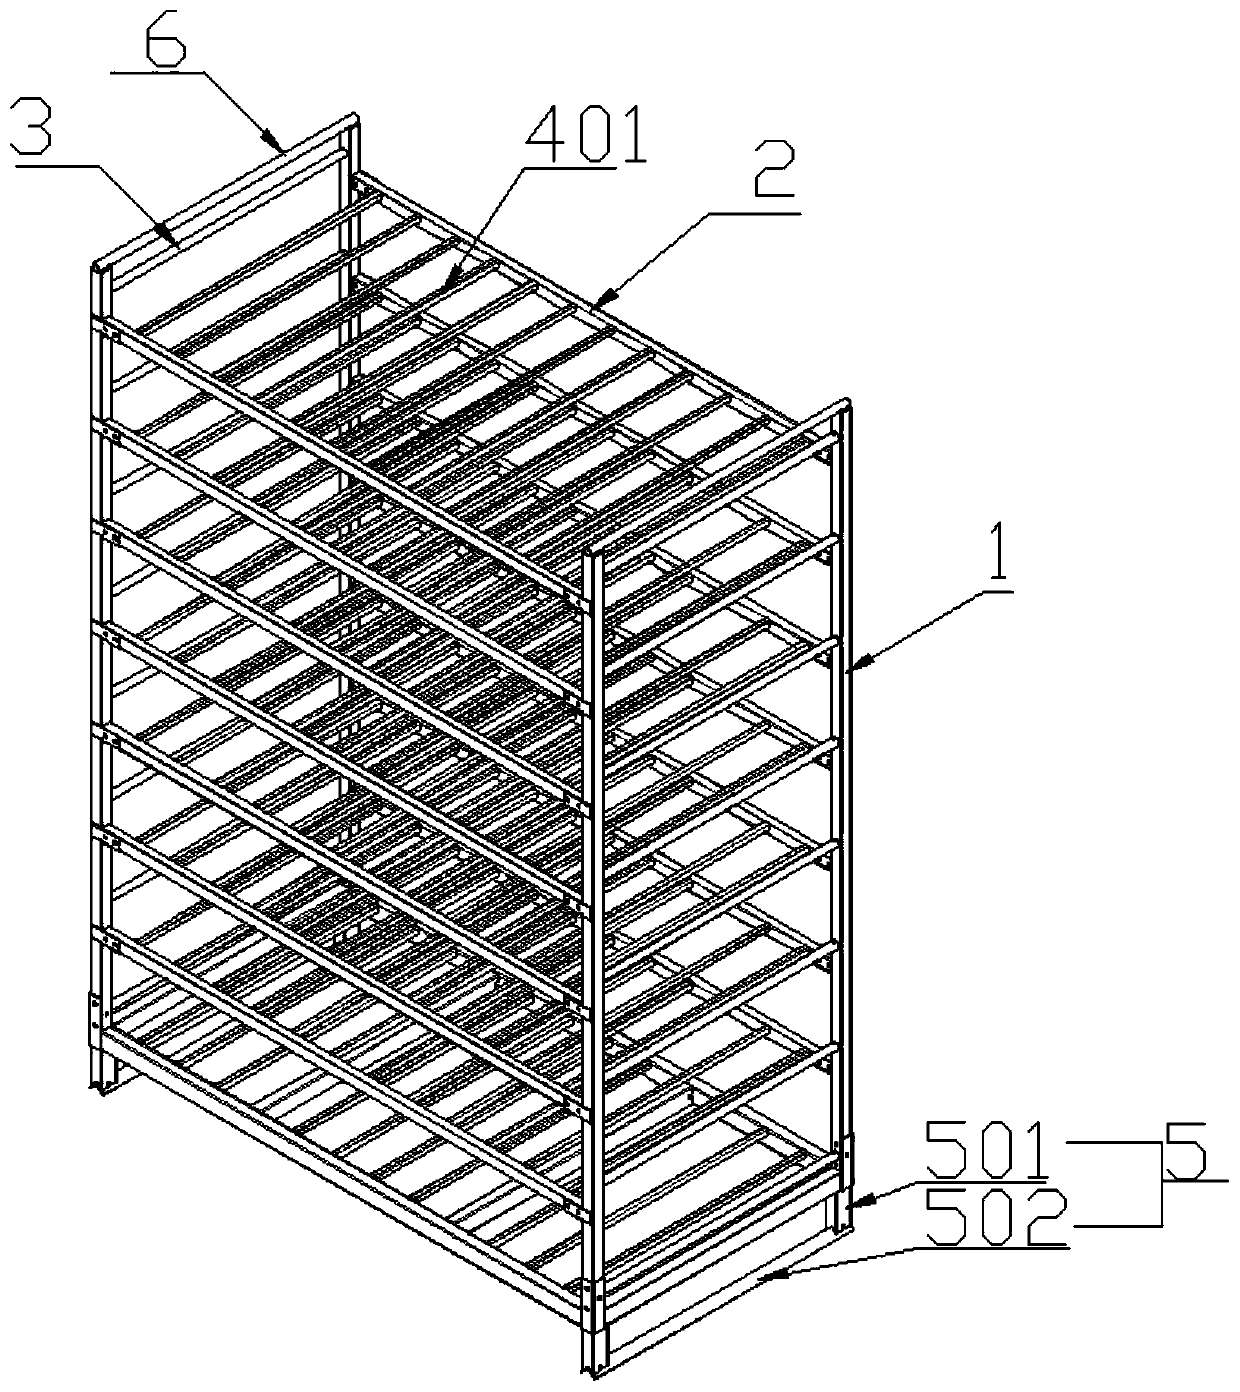 Special multifunctional grifola frondosa bed frame for experiment